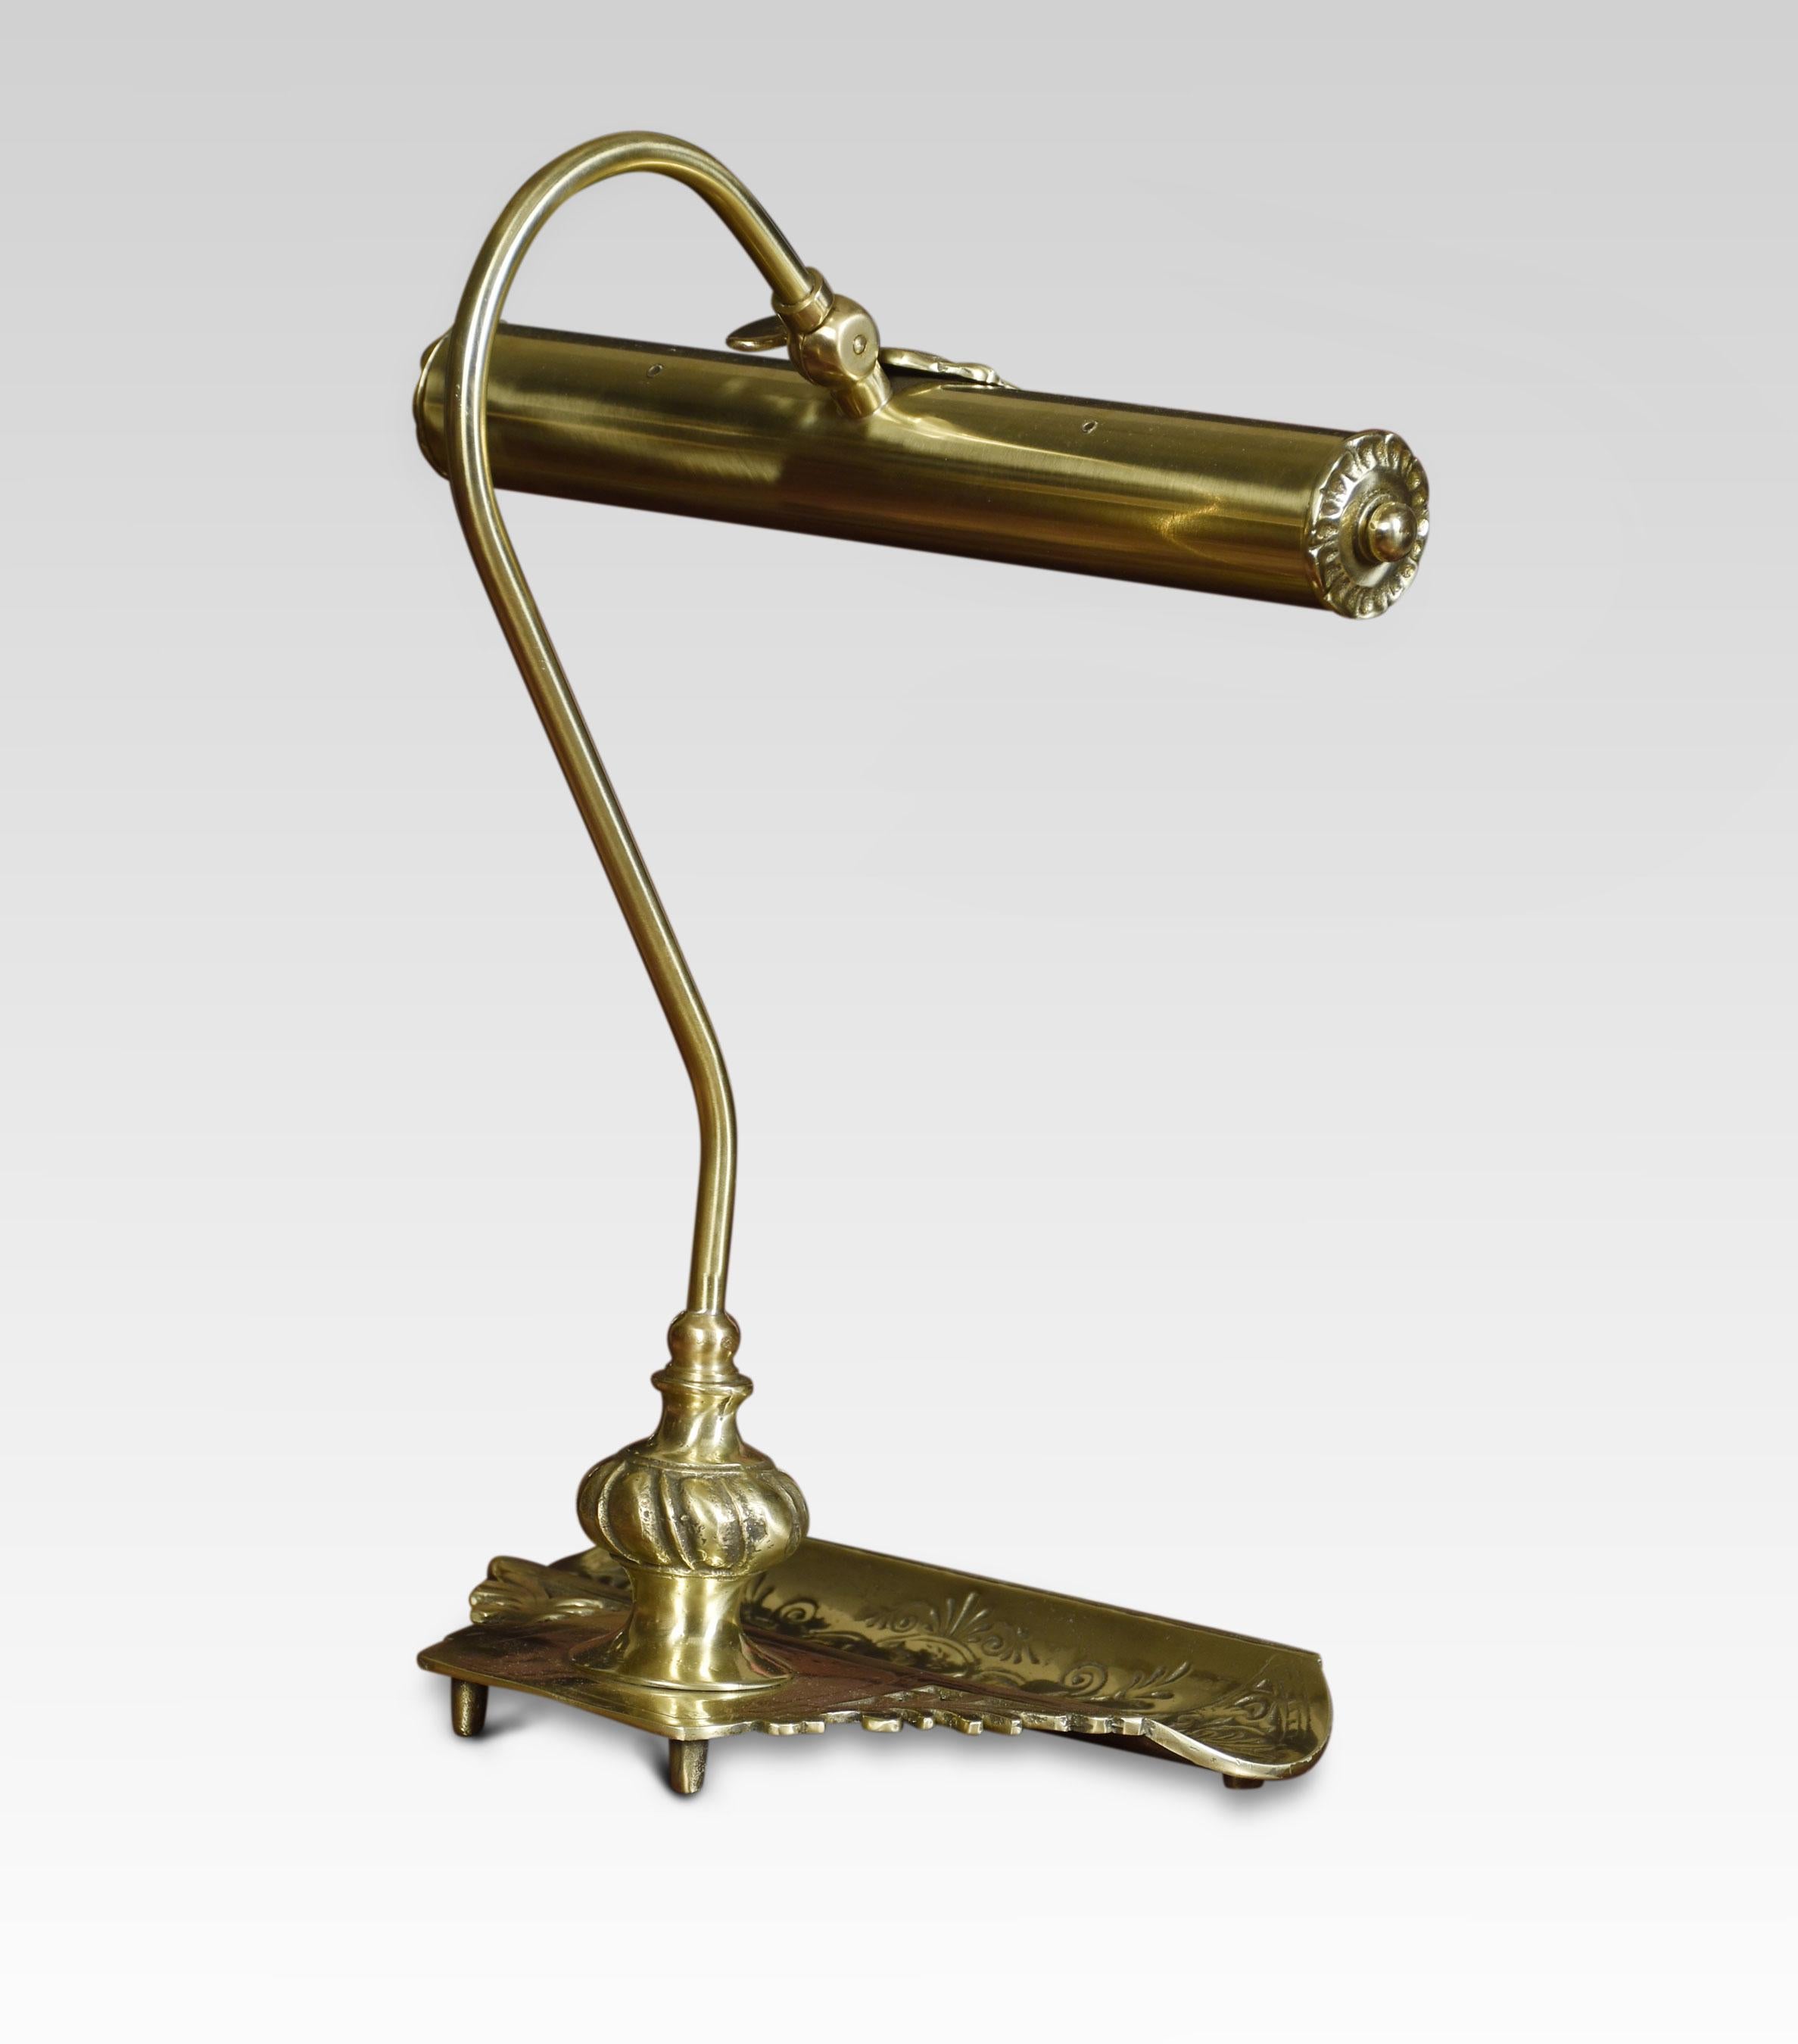 Bankers desk lamp, the brass base and pivoted sweeping arm supporting adjustable lampshade. The lamp has been rewired.
Dimensions
Height 15.5 inches
Width 12.5 inches
Depth 7.5 inches.